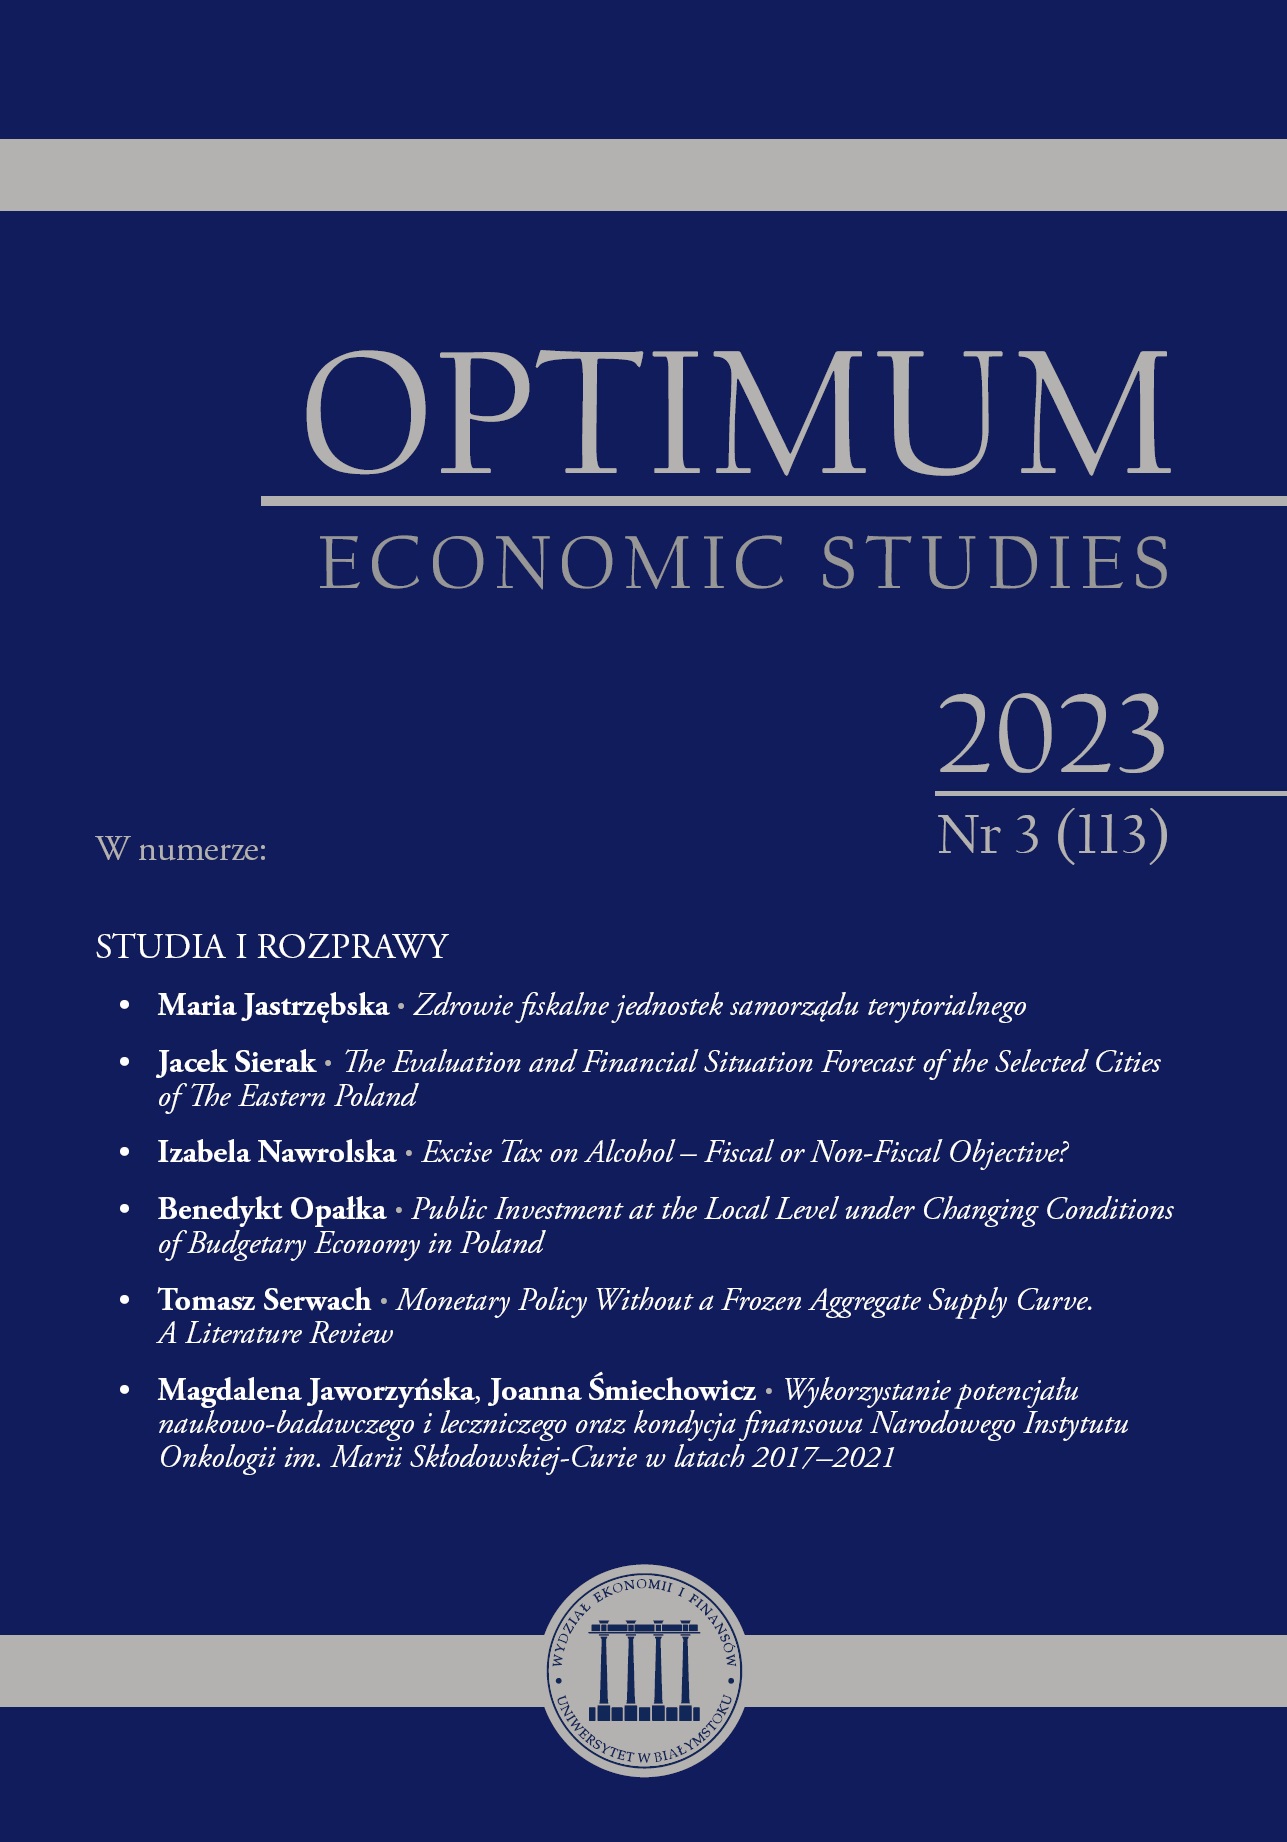 CREDIT FINANCING OF MICRO-ENTERPRISES AND FARMERS BY COMMERCIAL AND COOPERATIVE BANKS IN POLAND: DOES THE USE OF INVESTMENT AND WORKING CAPITAL LOANS CHANGE DURING THE COVID-19 PANDEMIC?